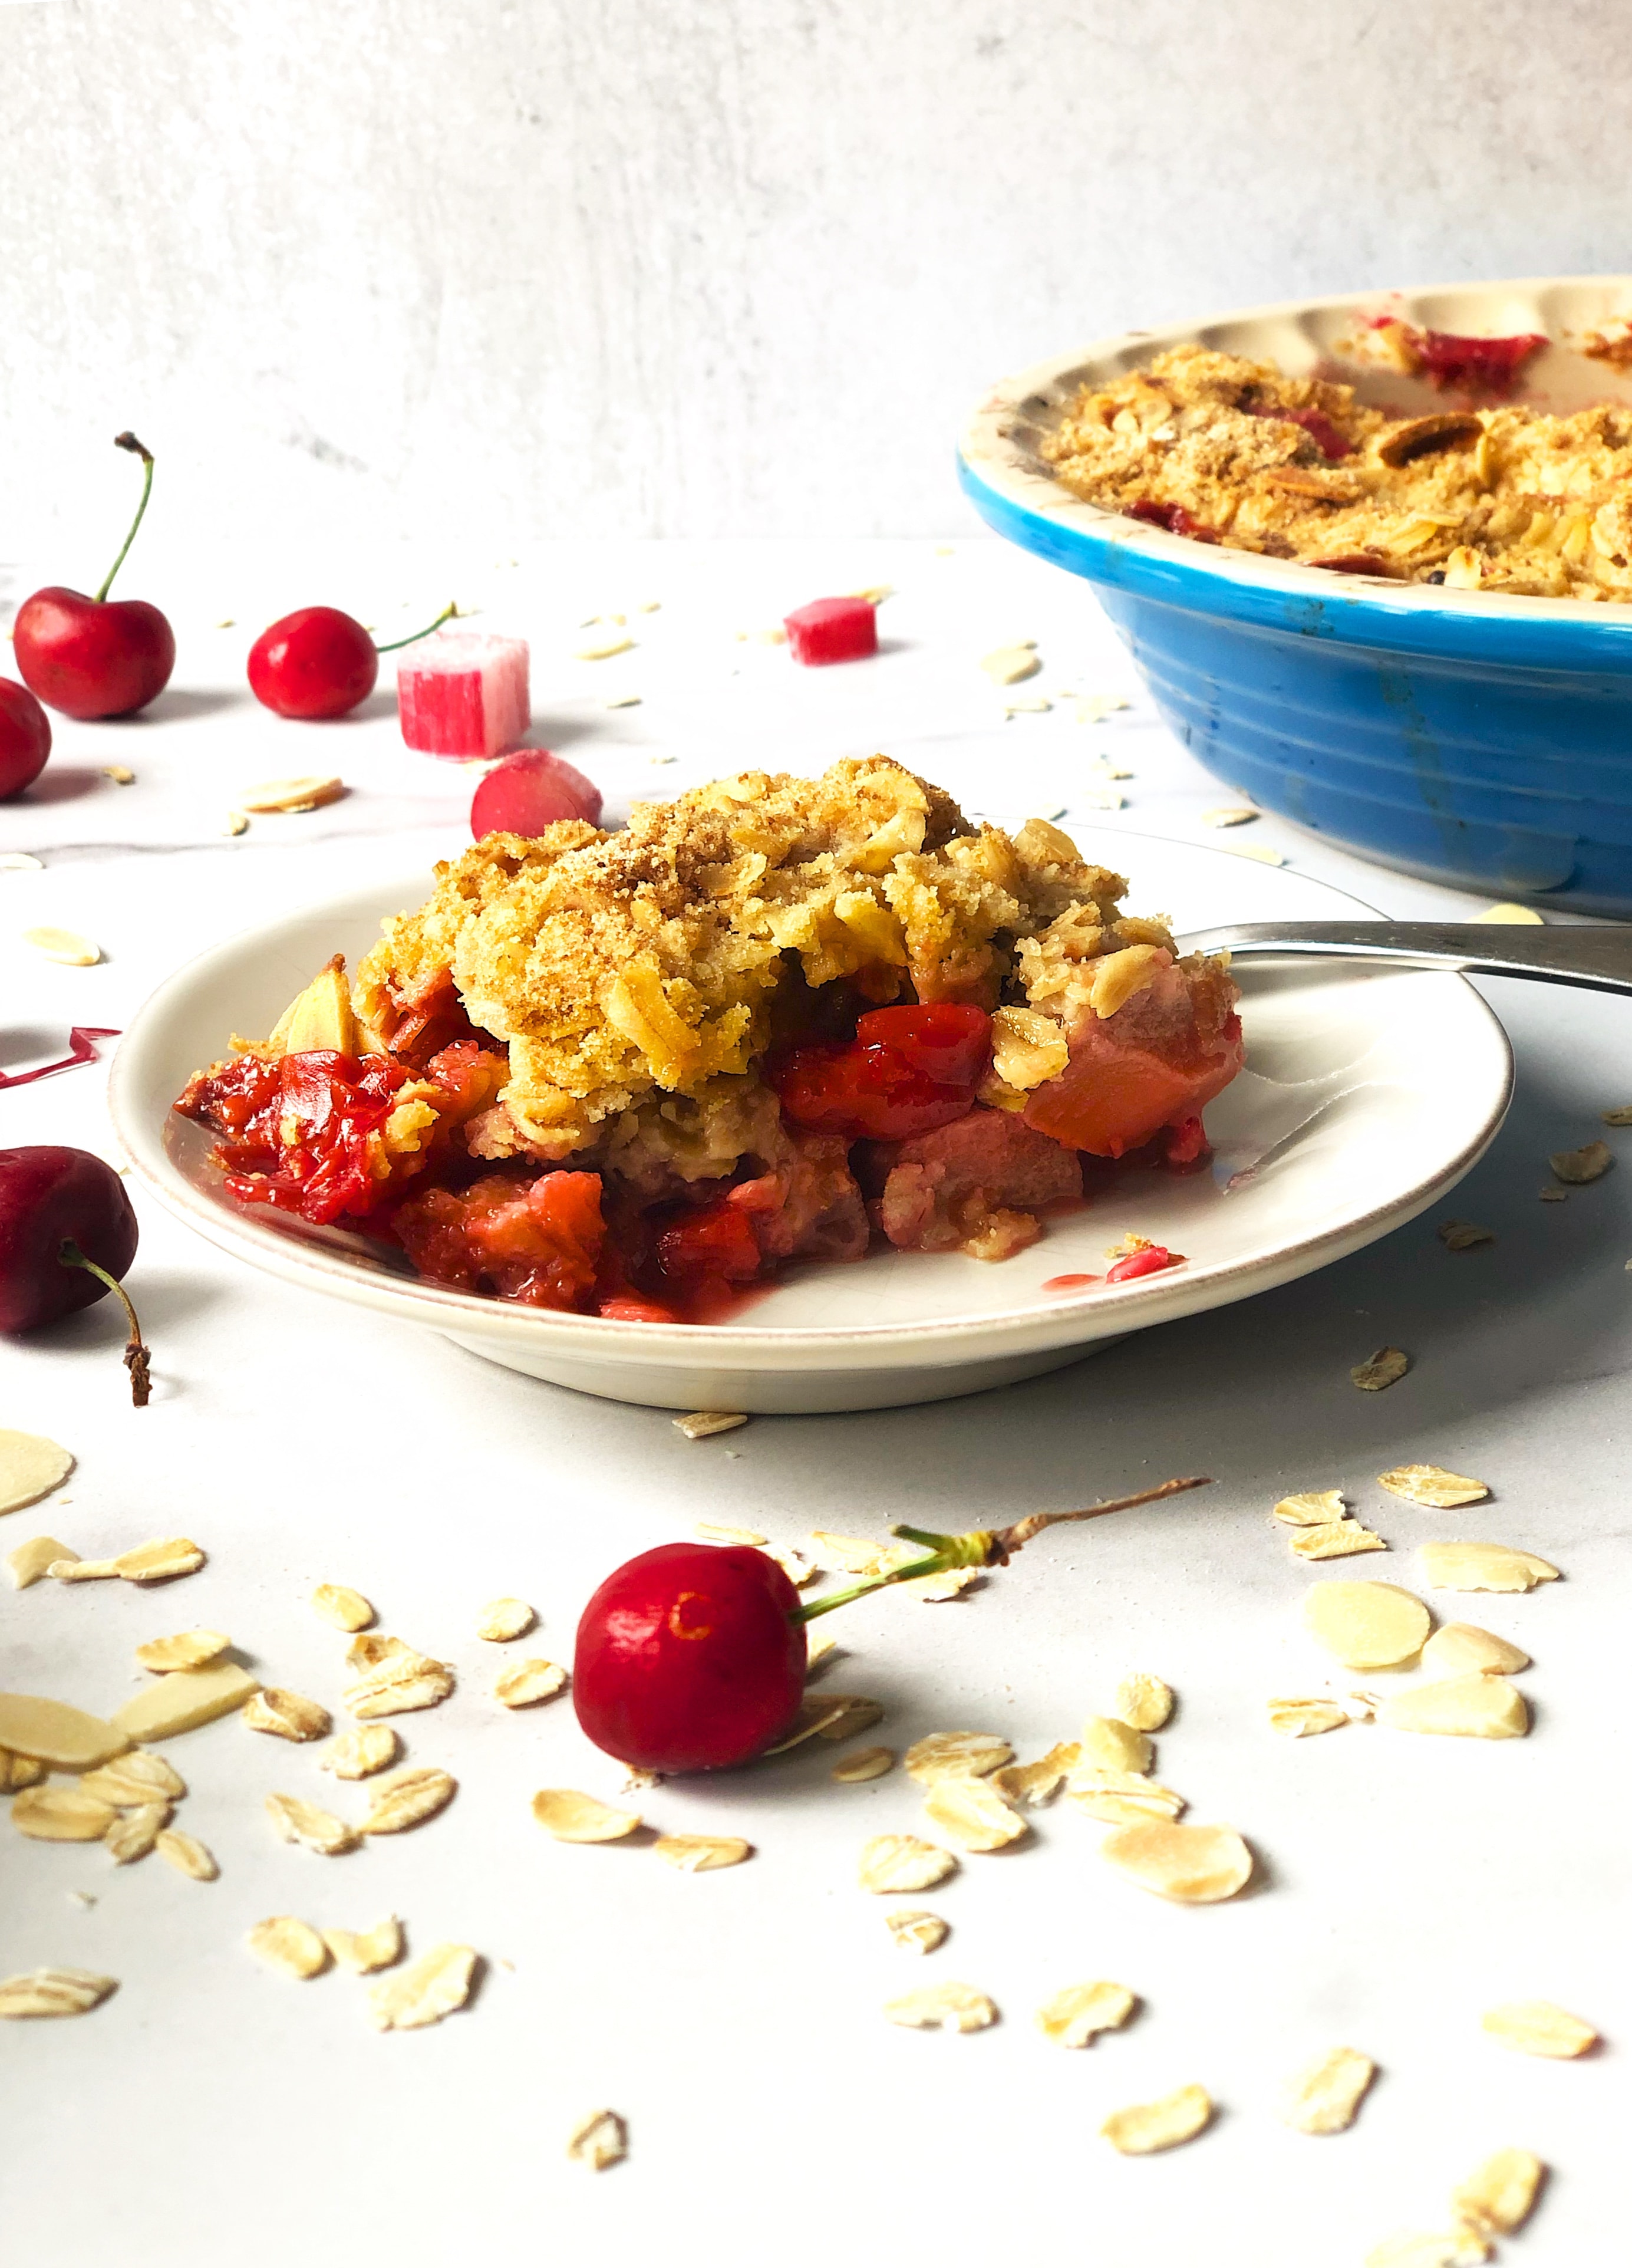 Slice of Summer Fruit Crisp - Strawberries, Rhubarb, Cherries in a buttery crisp with oats and almonds